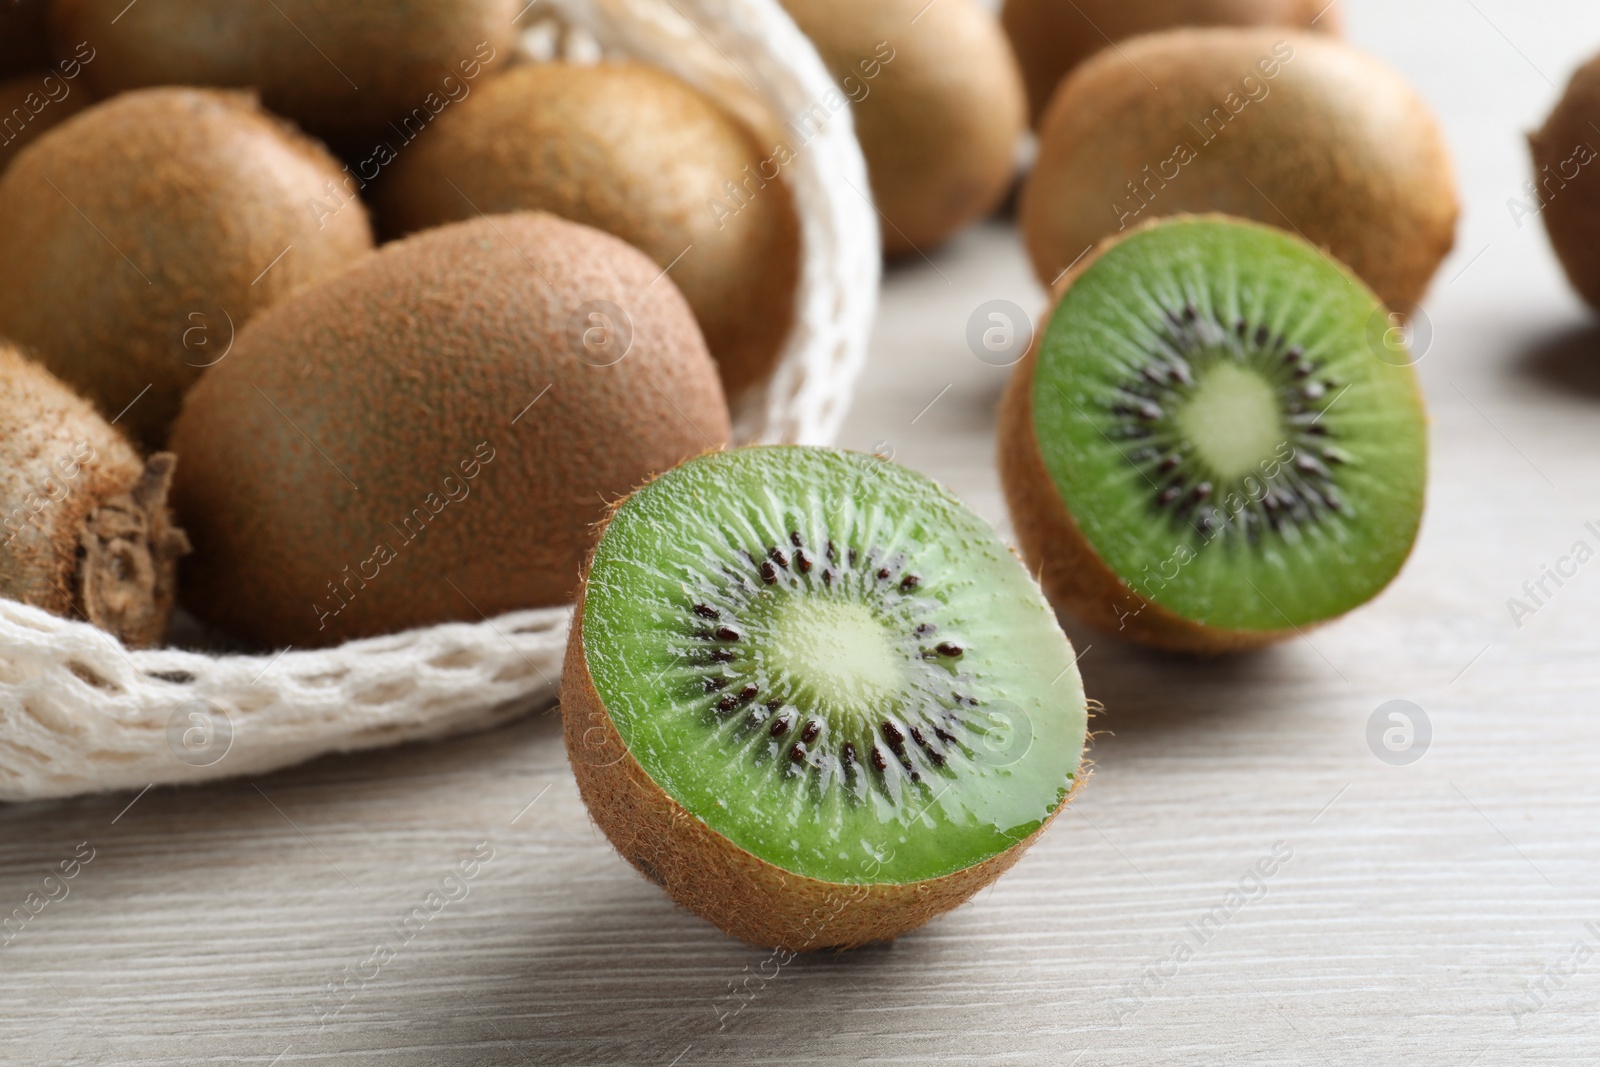 Photo of Cut and whole fresh kiwis on white wooden table, closeup